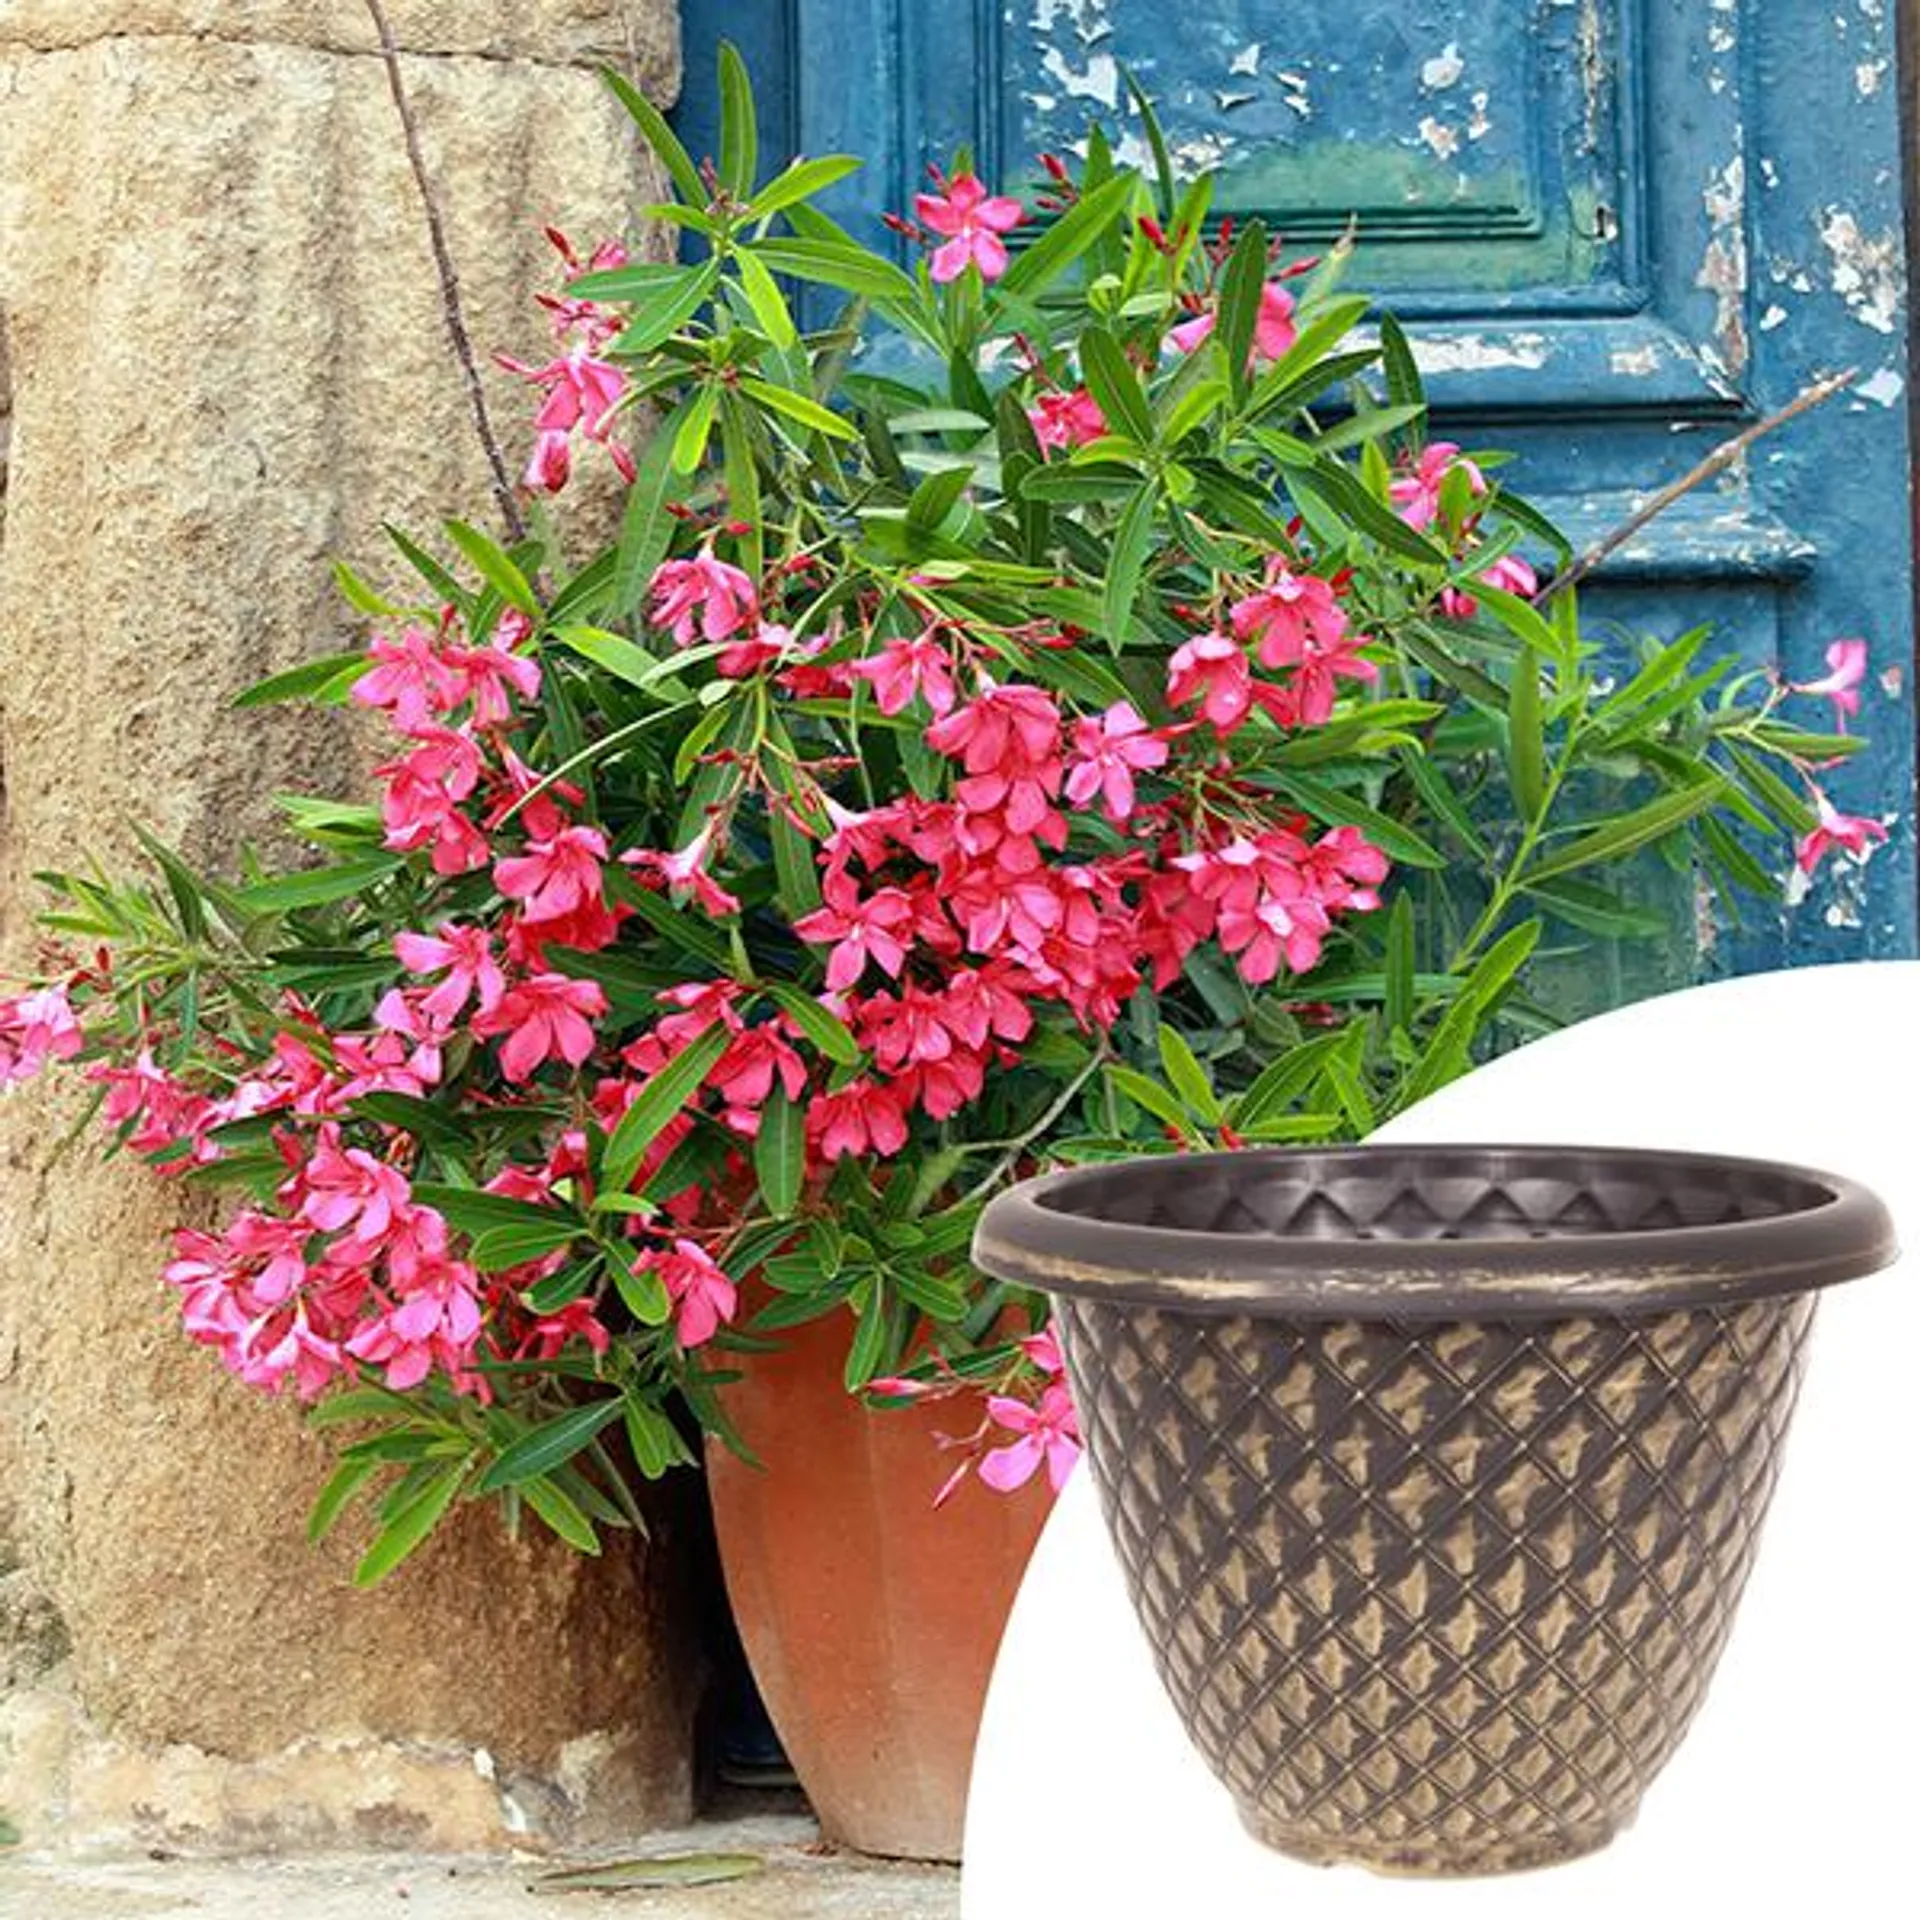 Pair of Oleander Bushes with Pinecone Planters